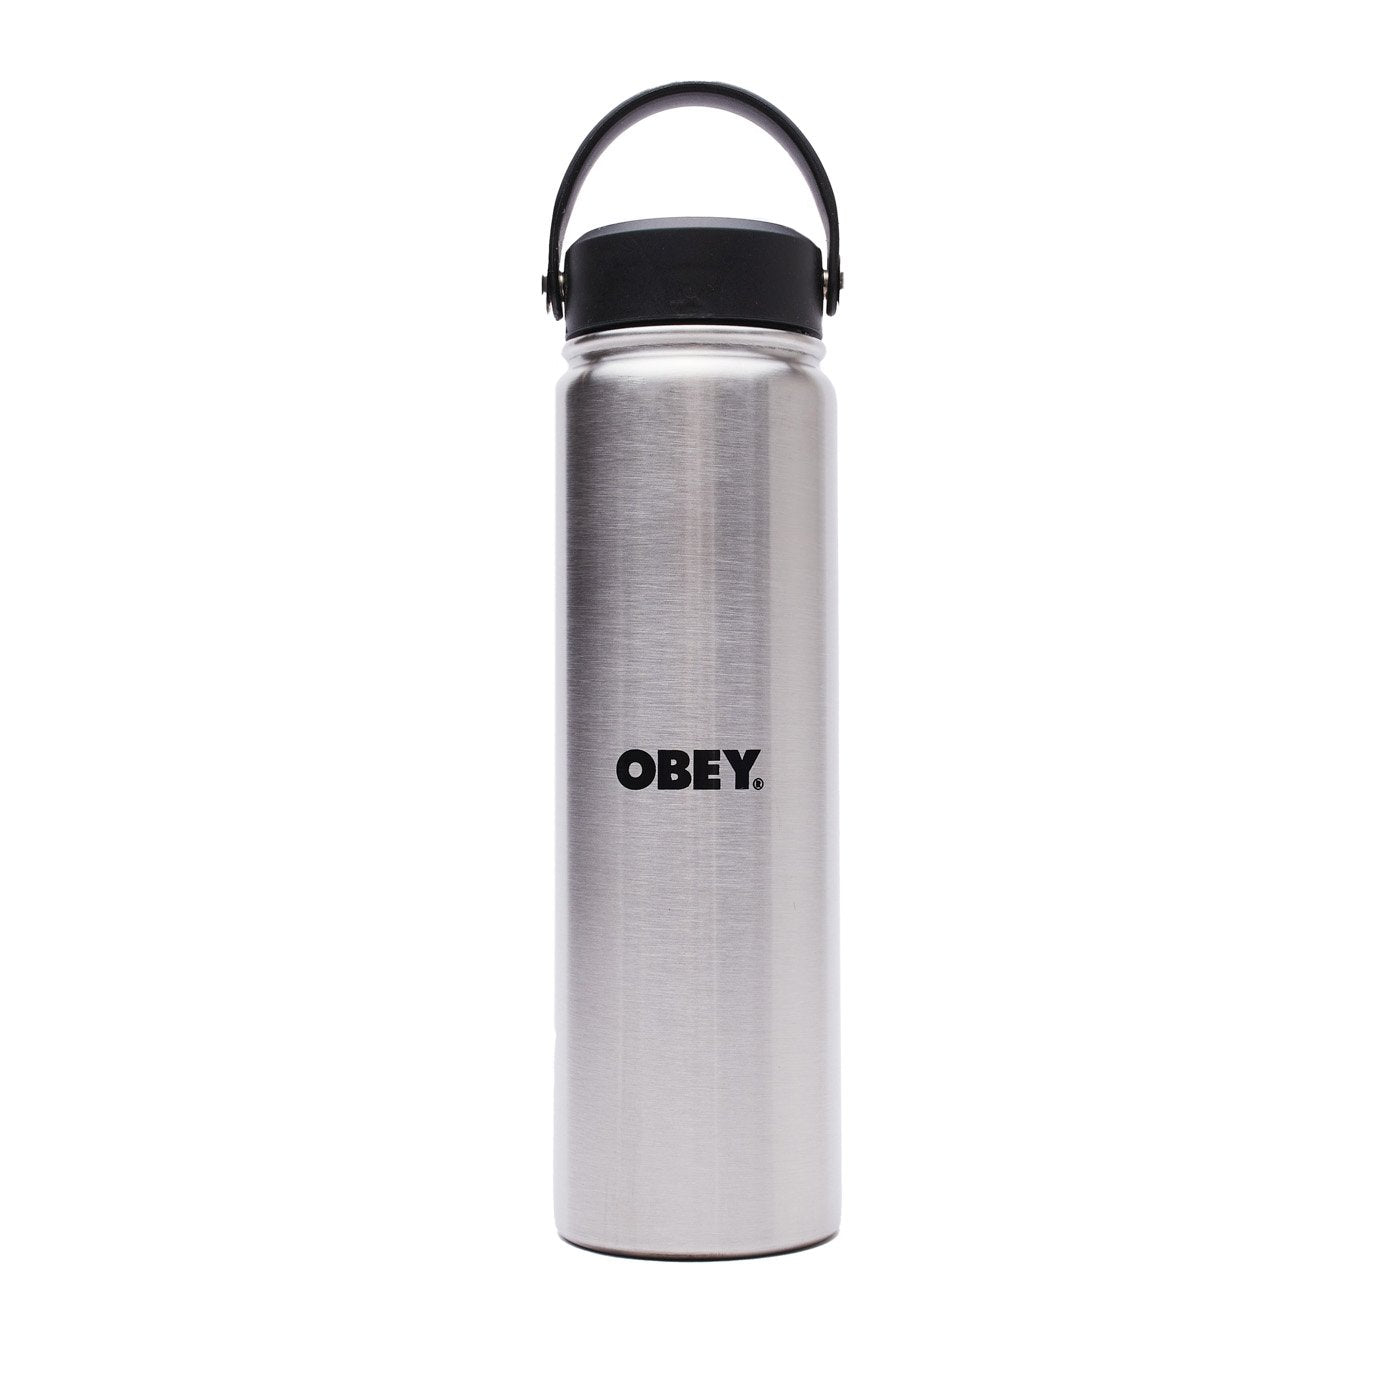 OBEY Protest Bottle